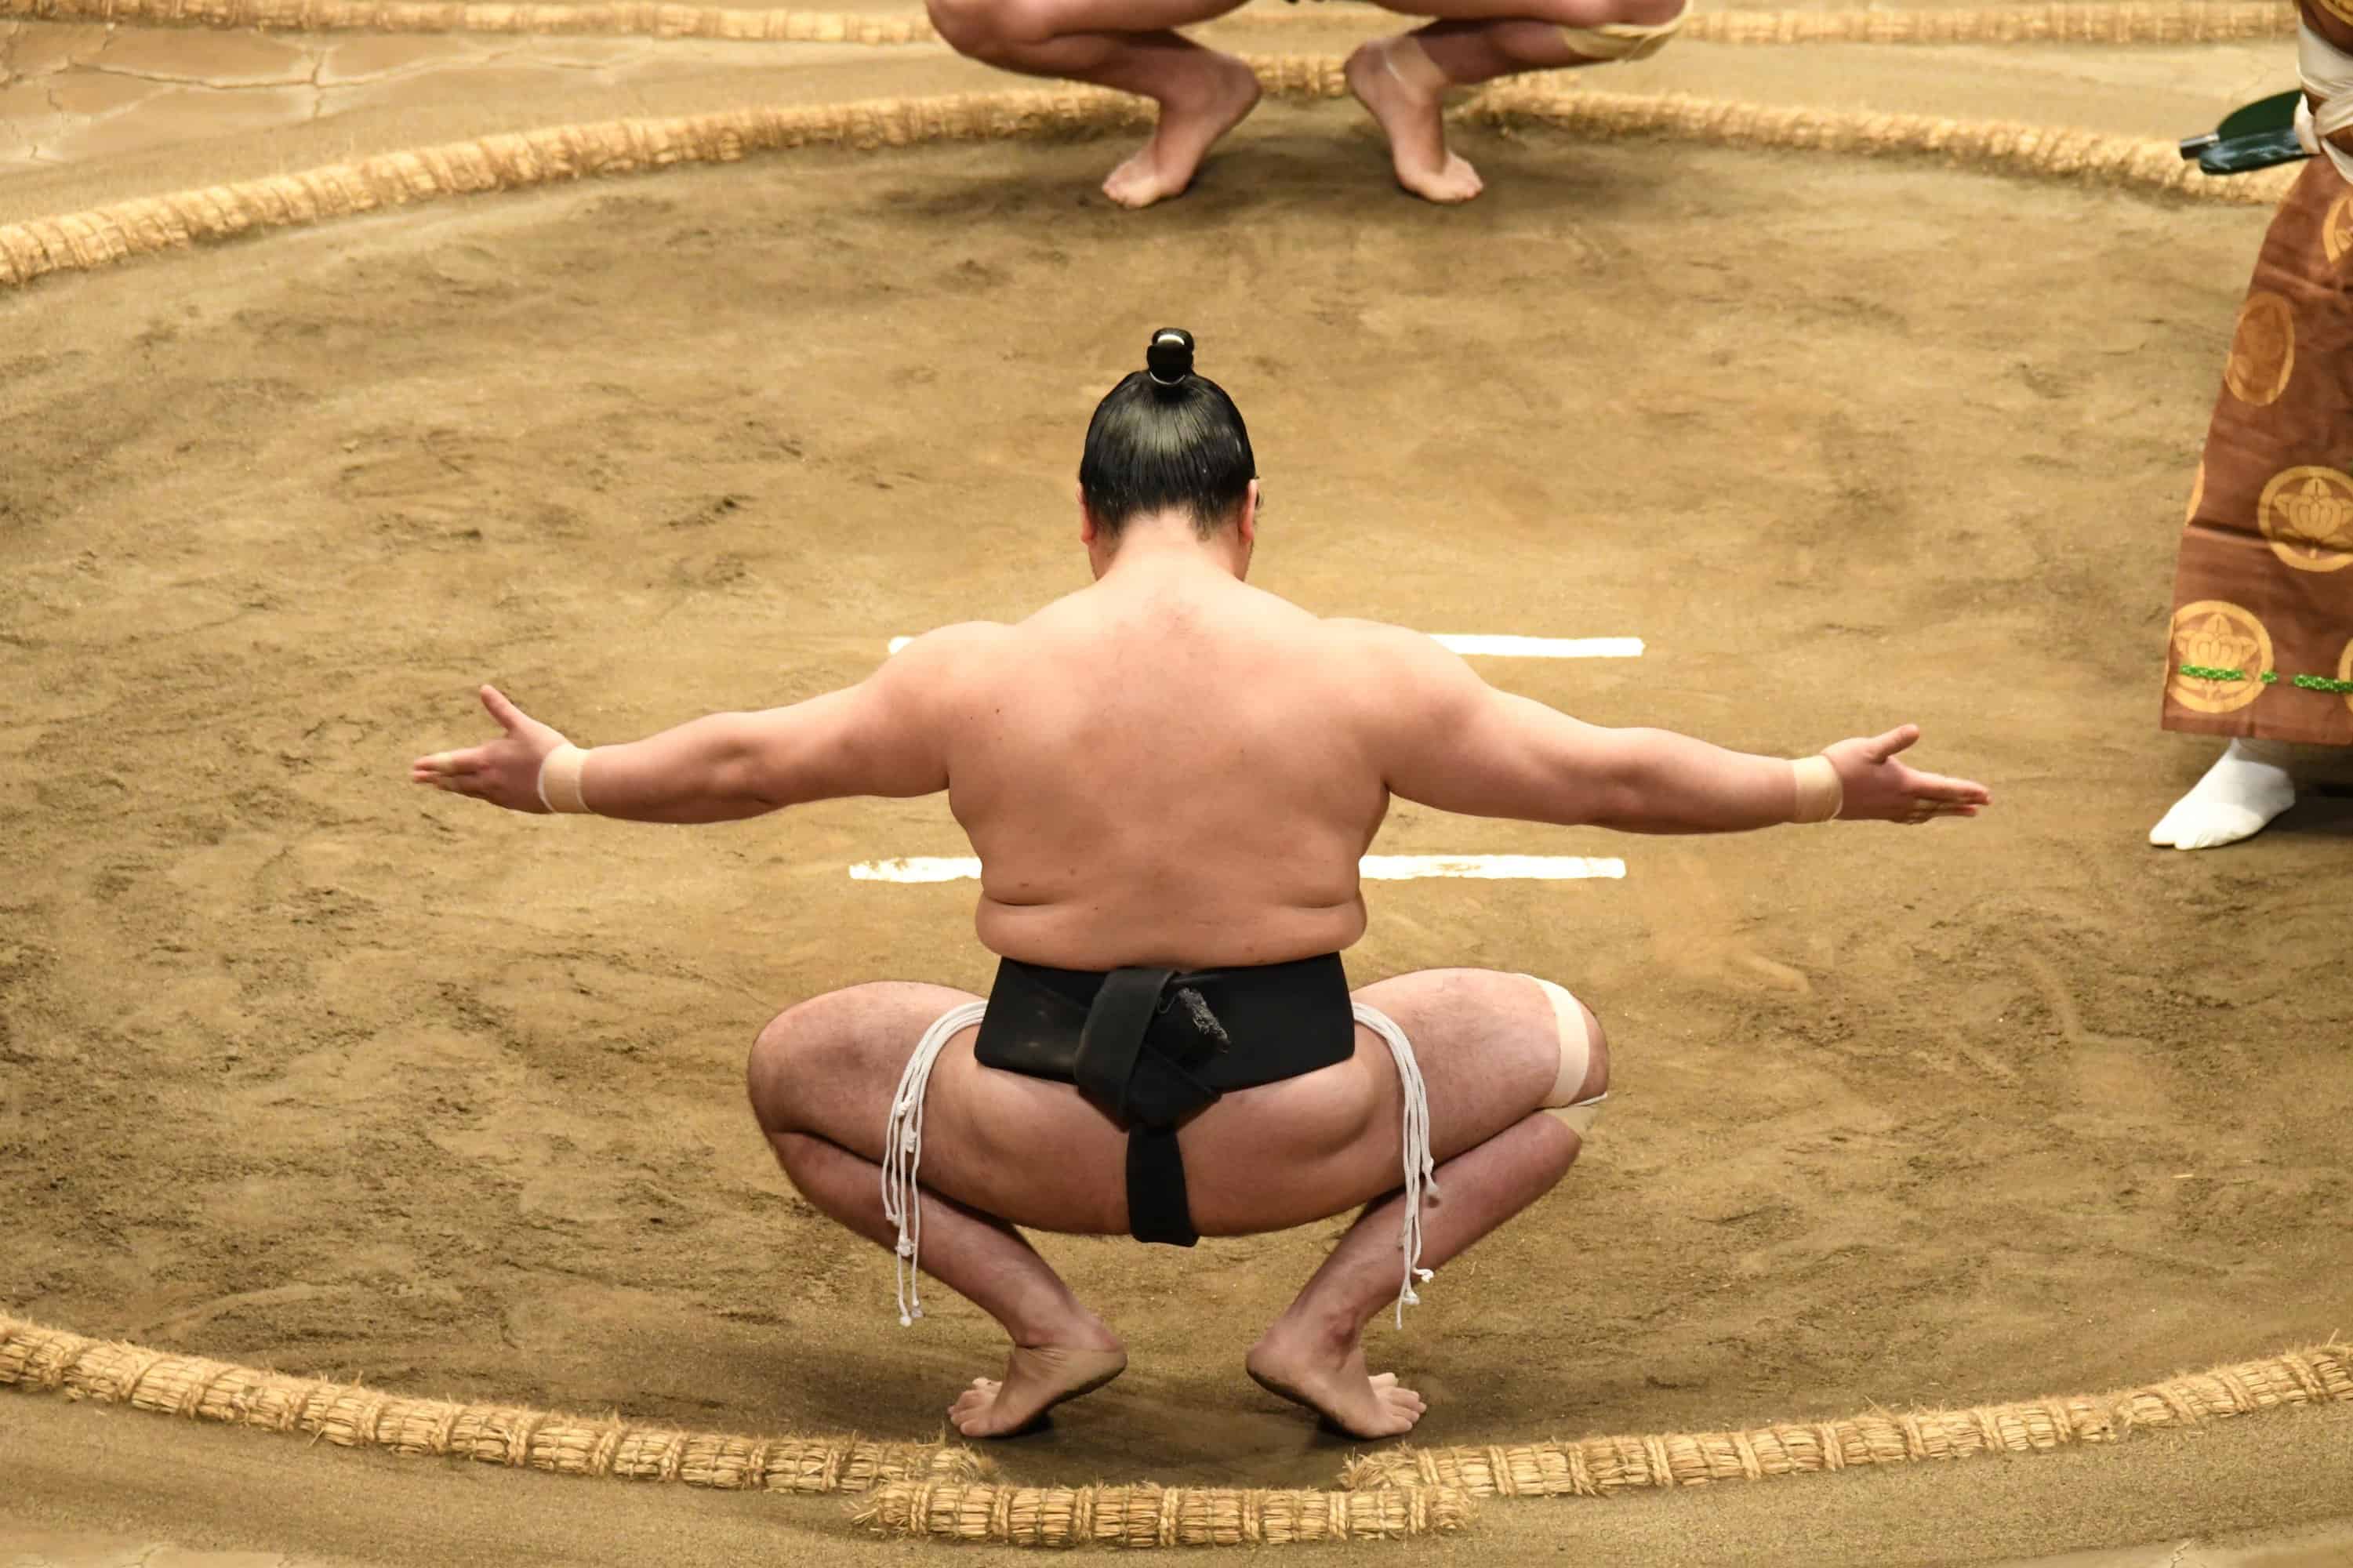 Yes, You Should Definitely Check Out Sumo Wrestling on Your Trip to Japan